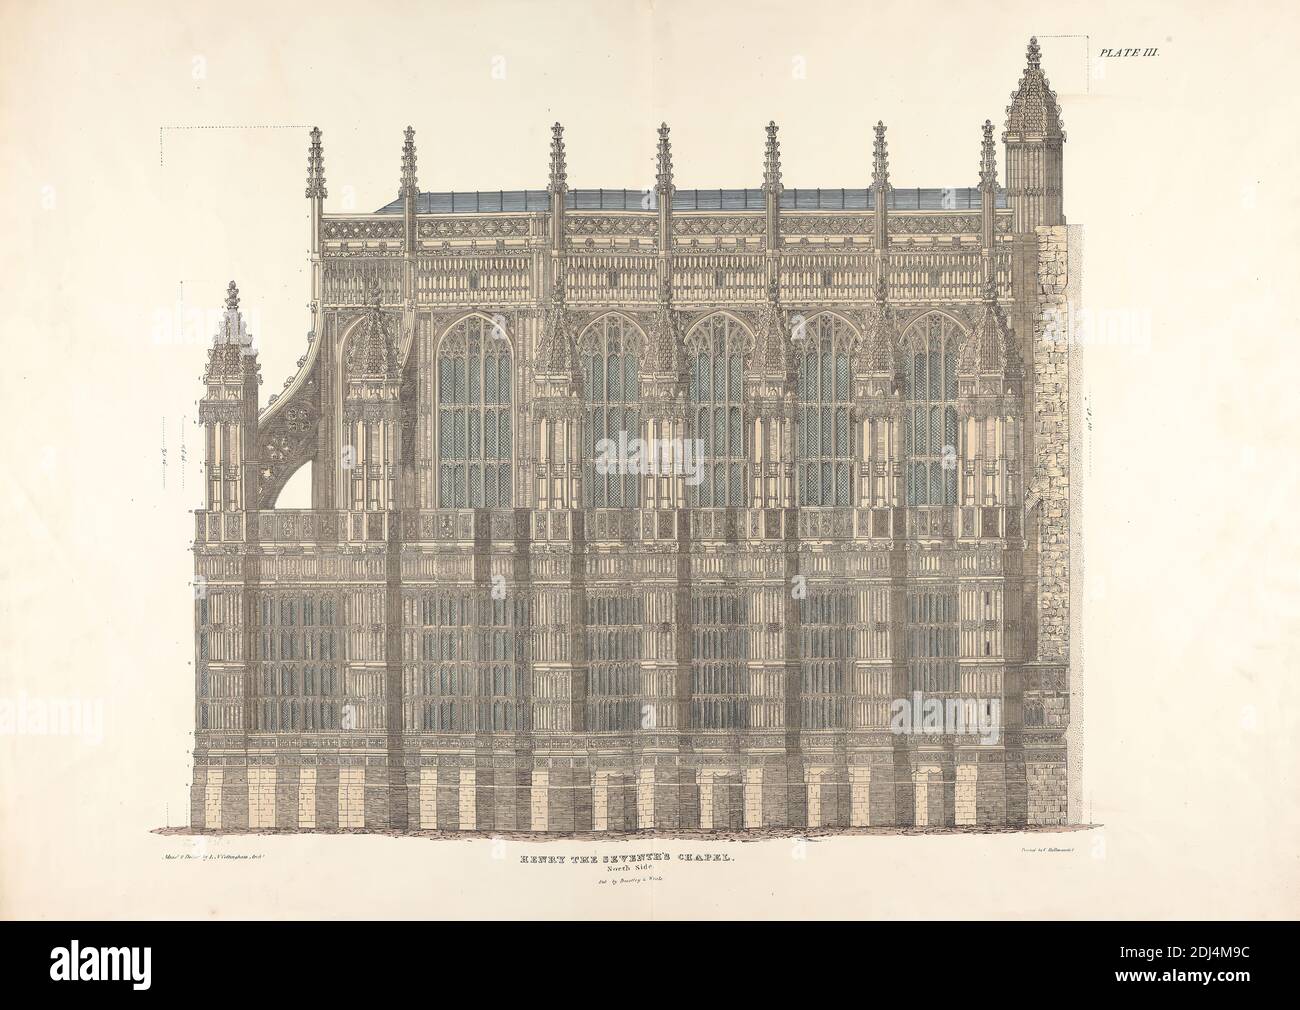 Henry the Seventh's Chapel, North Side, Print made by Charles J. Hullmandel, 1789–1850, British, after Lewis Nockalls Cottingham, 1787–1847, British, undated, Lithograph on slightly textured, medium, white wove paper, Sheet: 23 7/8 × 33 1/2 inches (60.6 × 85.1 cm), architectural subject, City of Westminster, England, London, Palace of Westminster, United Kingdom, Westminster Abbey Stock Photo